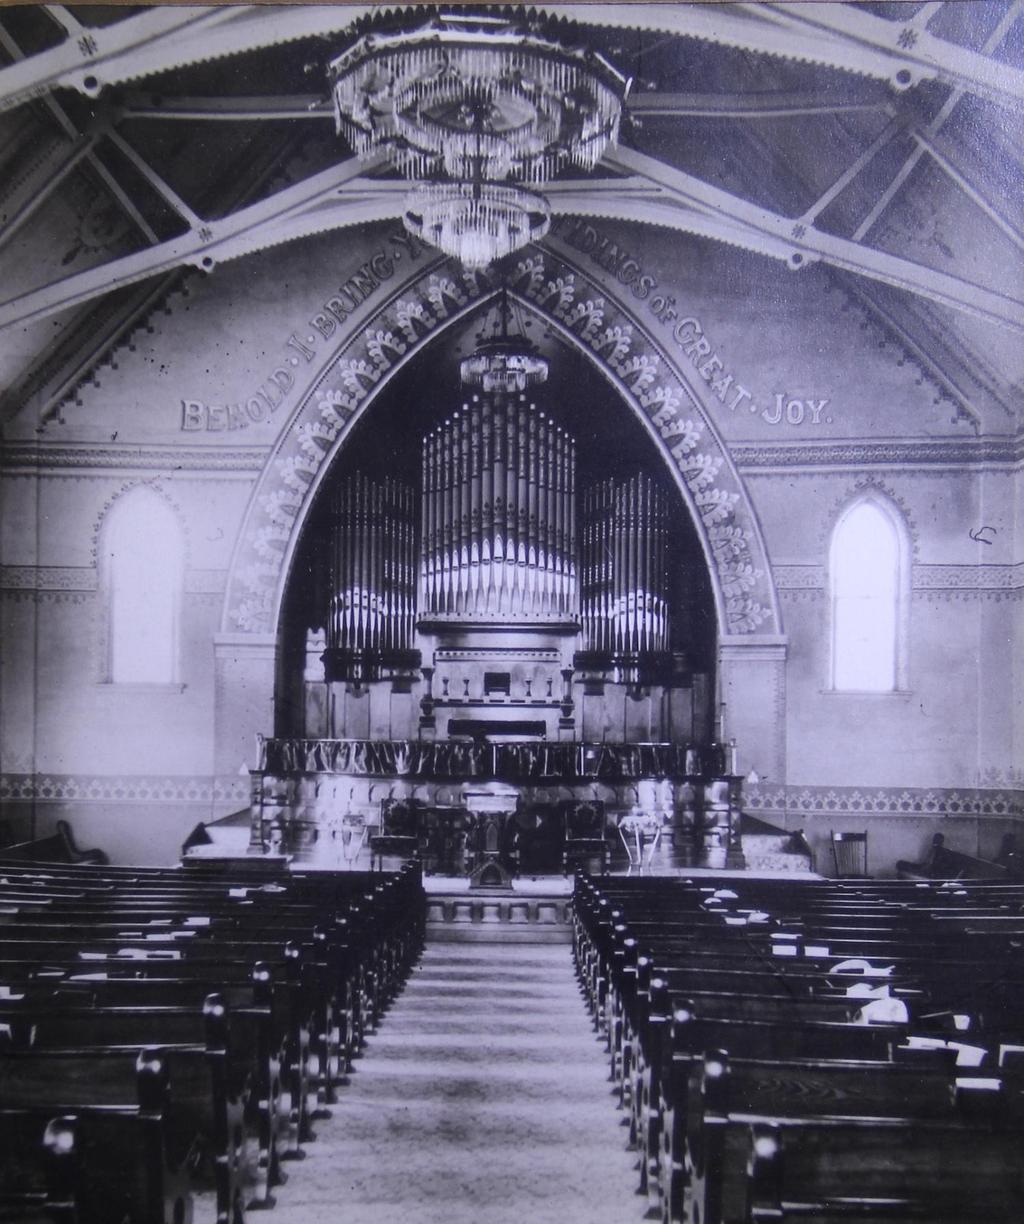 During the second year of Rev. James Gordon 22 year tenure, the church installed a new grand pipe organ in 1892.